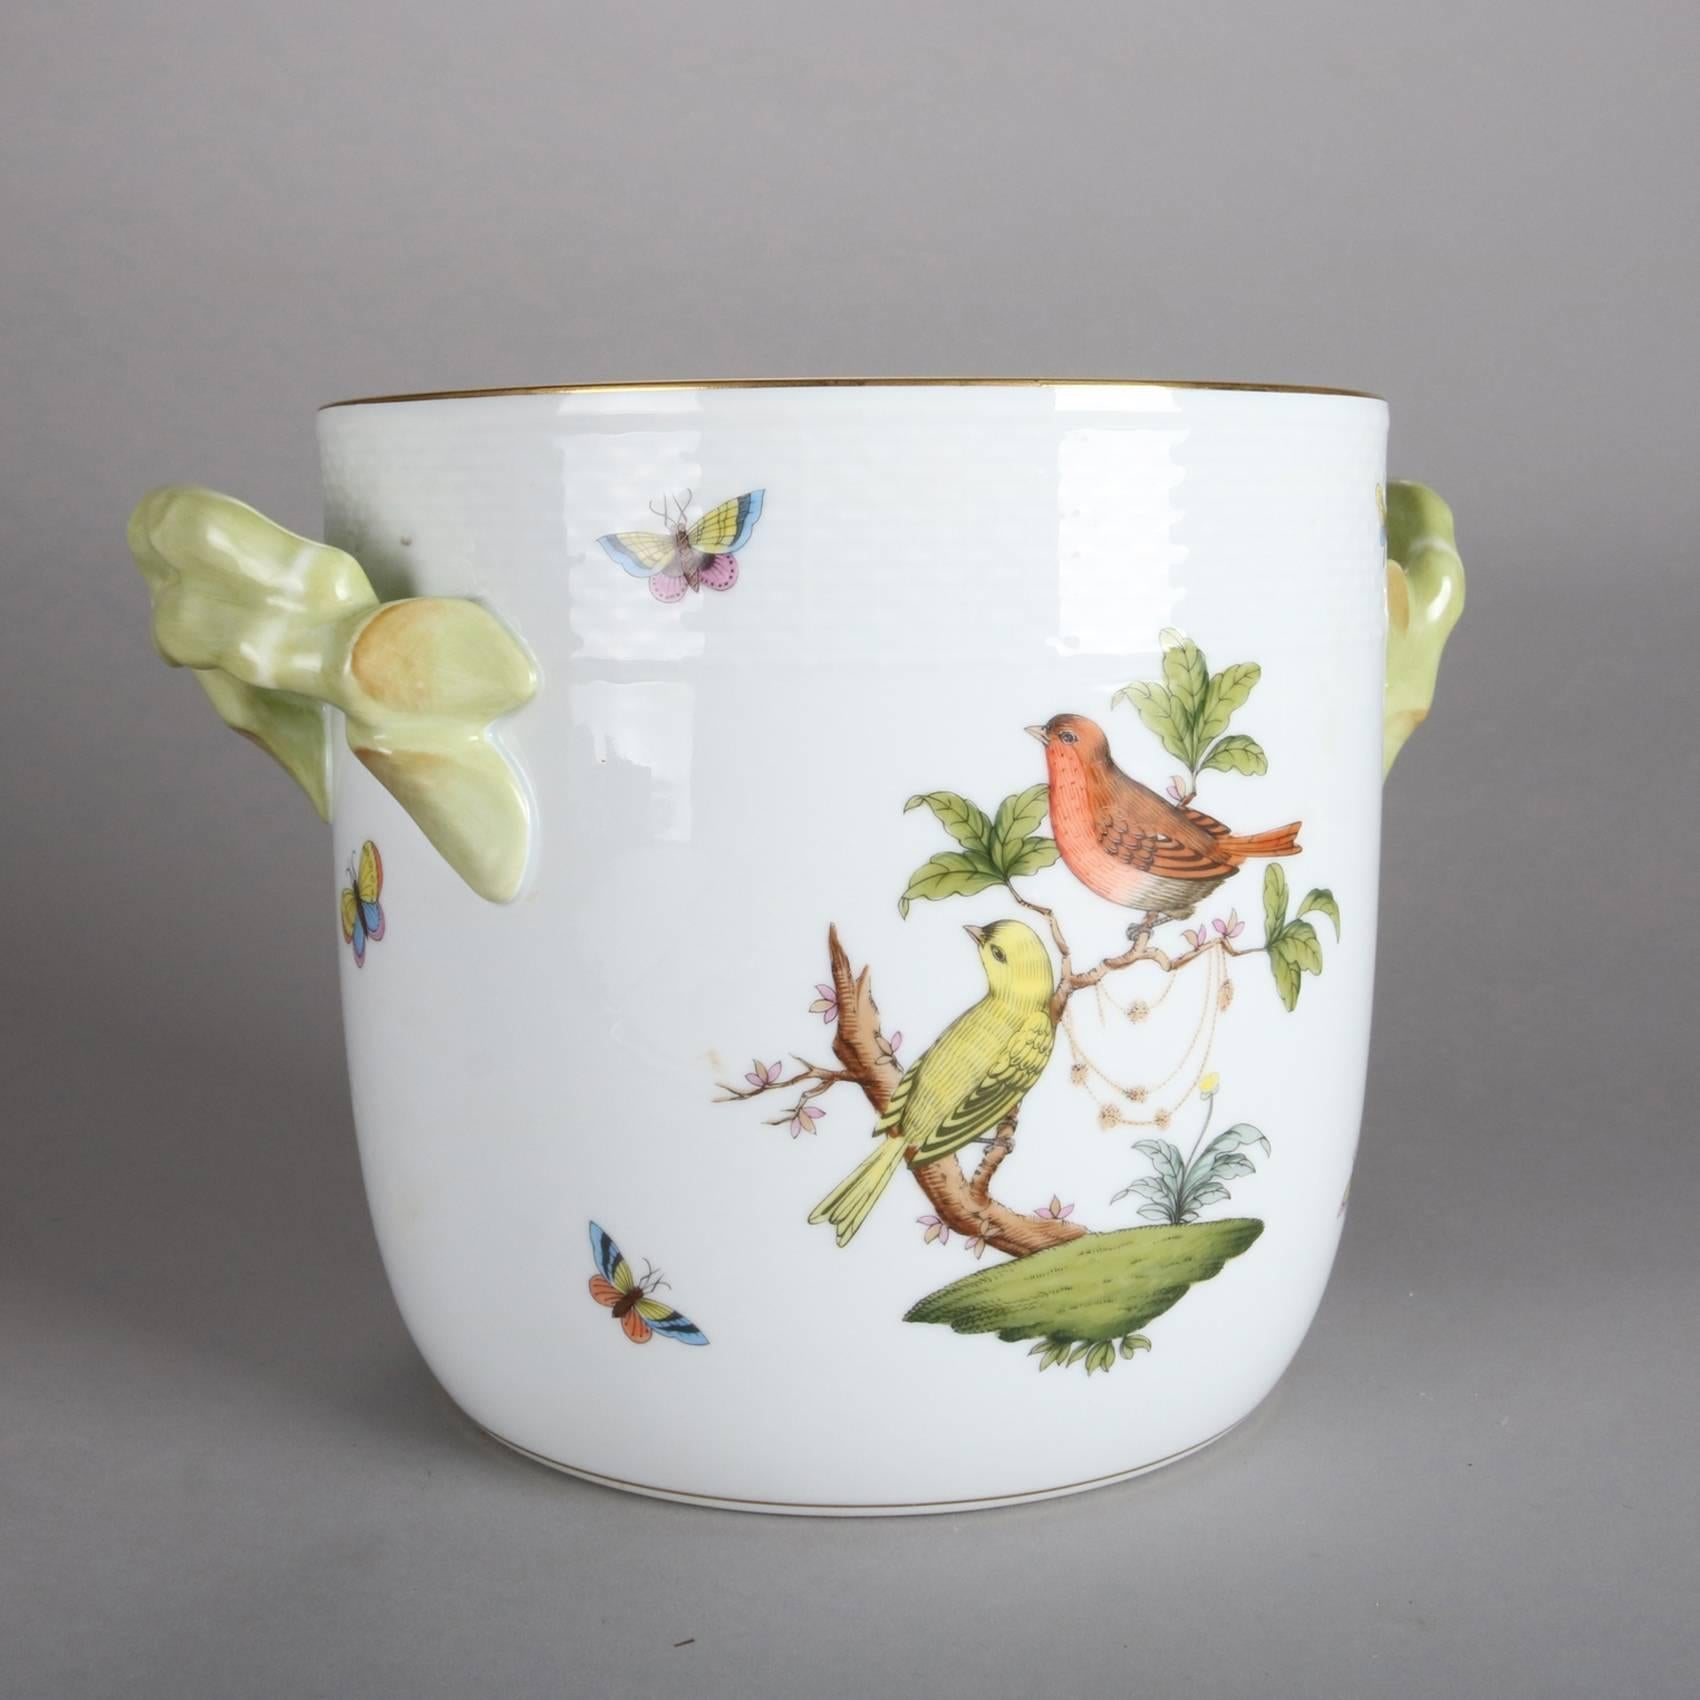 Hand-painted porcelain double handled ice bucket by Herend made in Hungary, Rothschild Bird, 20th century.

Measures: 7.25